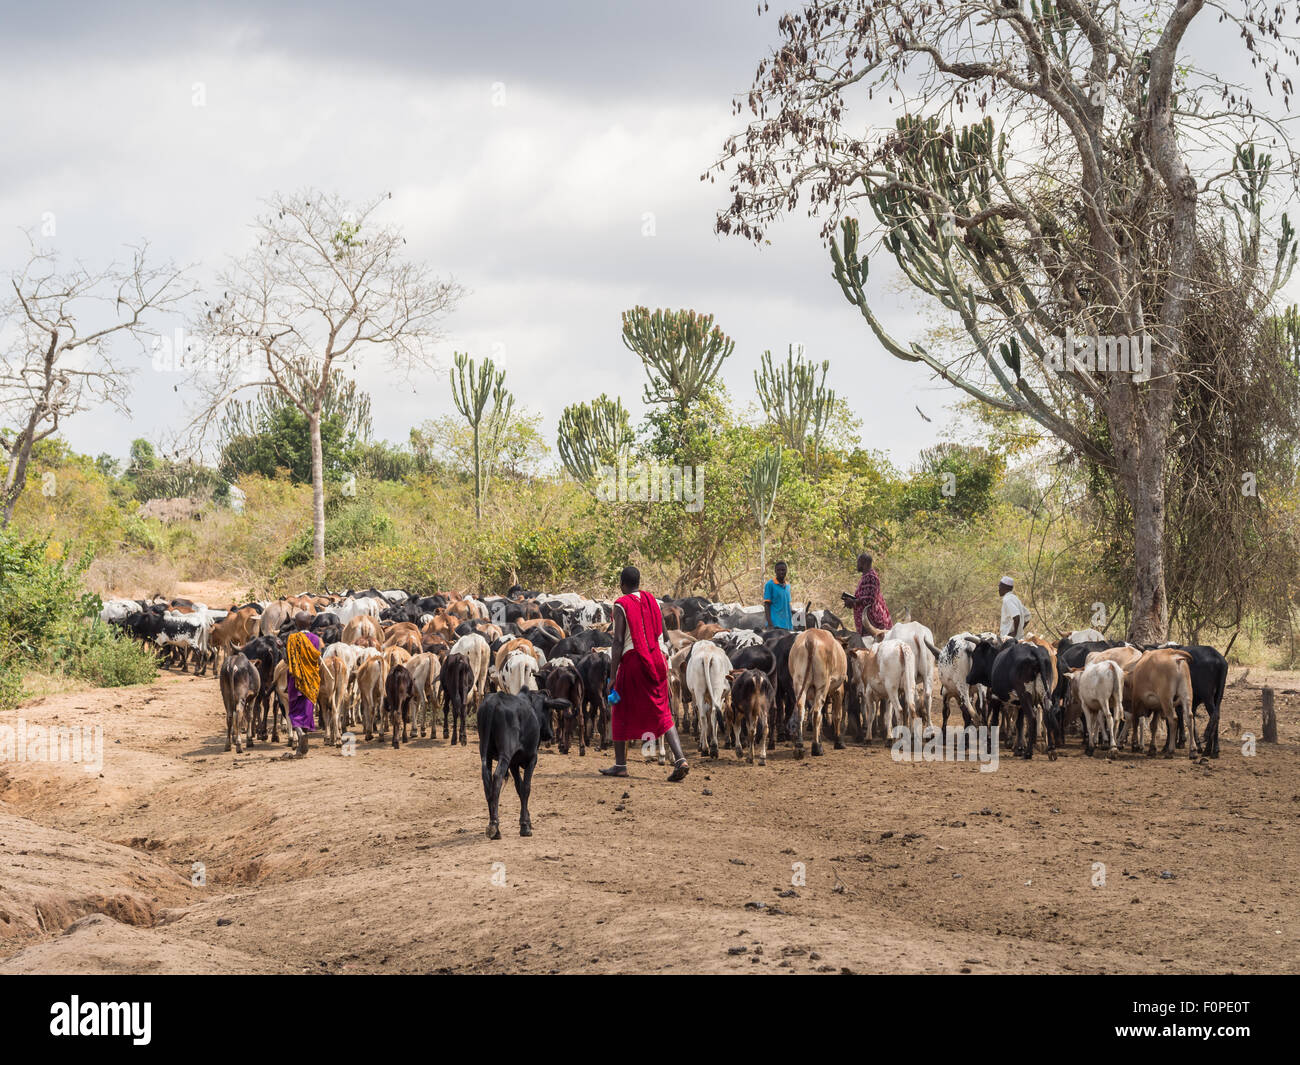 Maasai herders with their livestock in Tanzania, Africa. Stock Photo